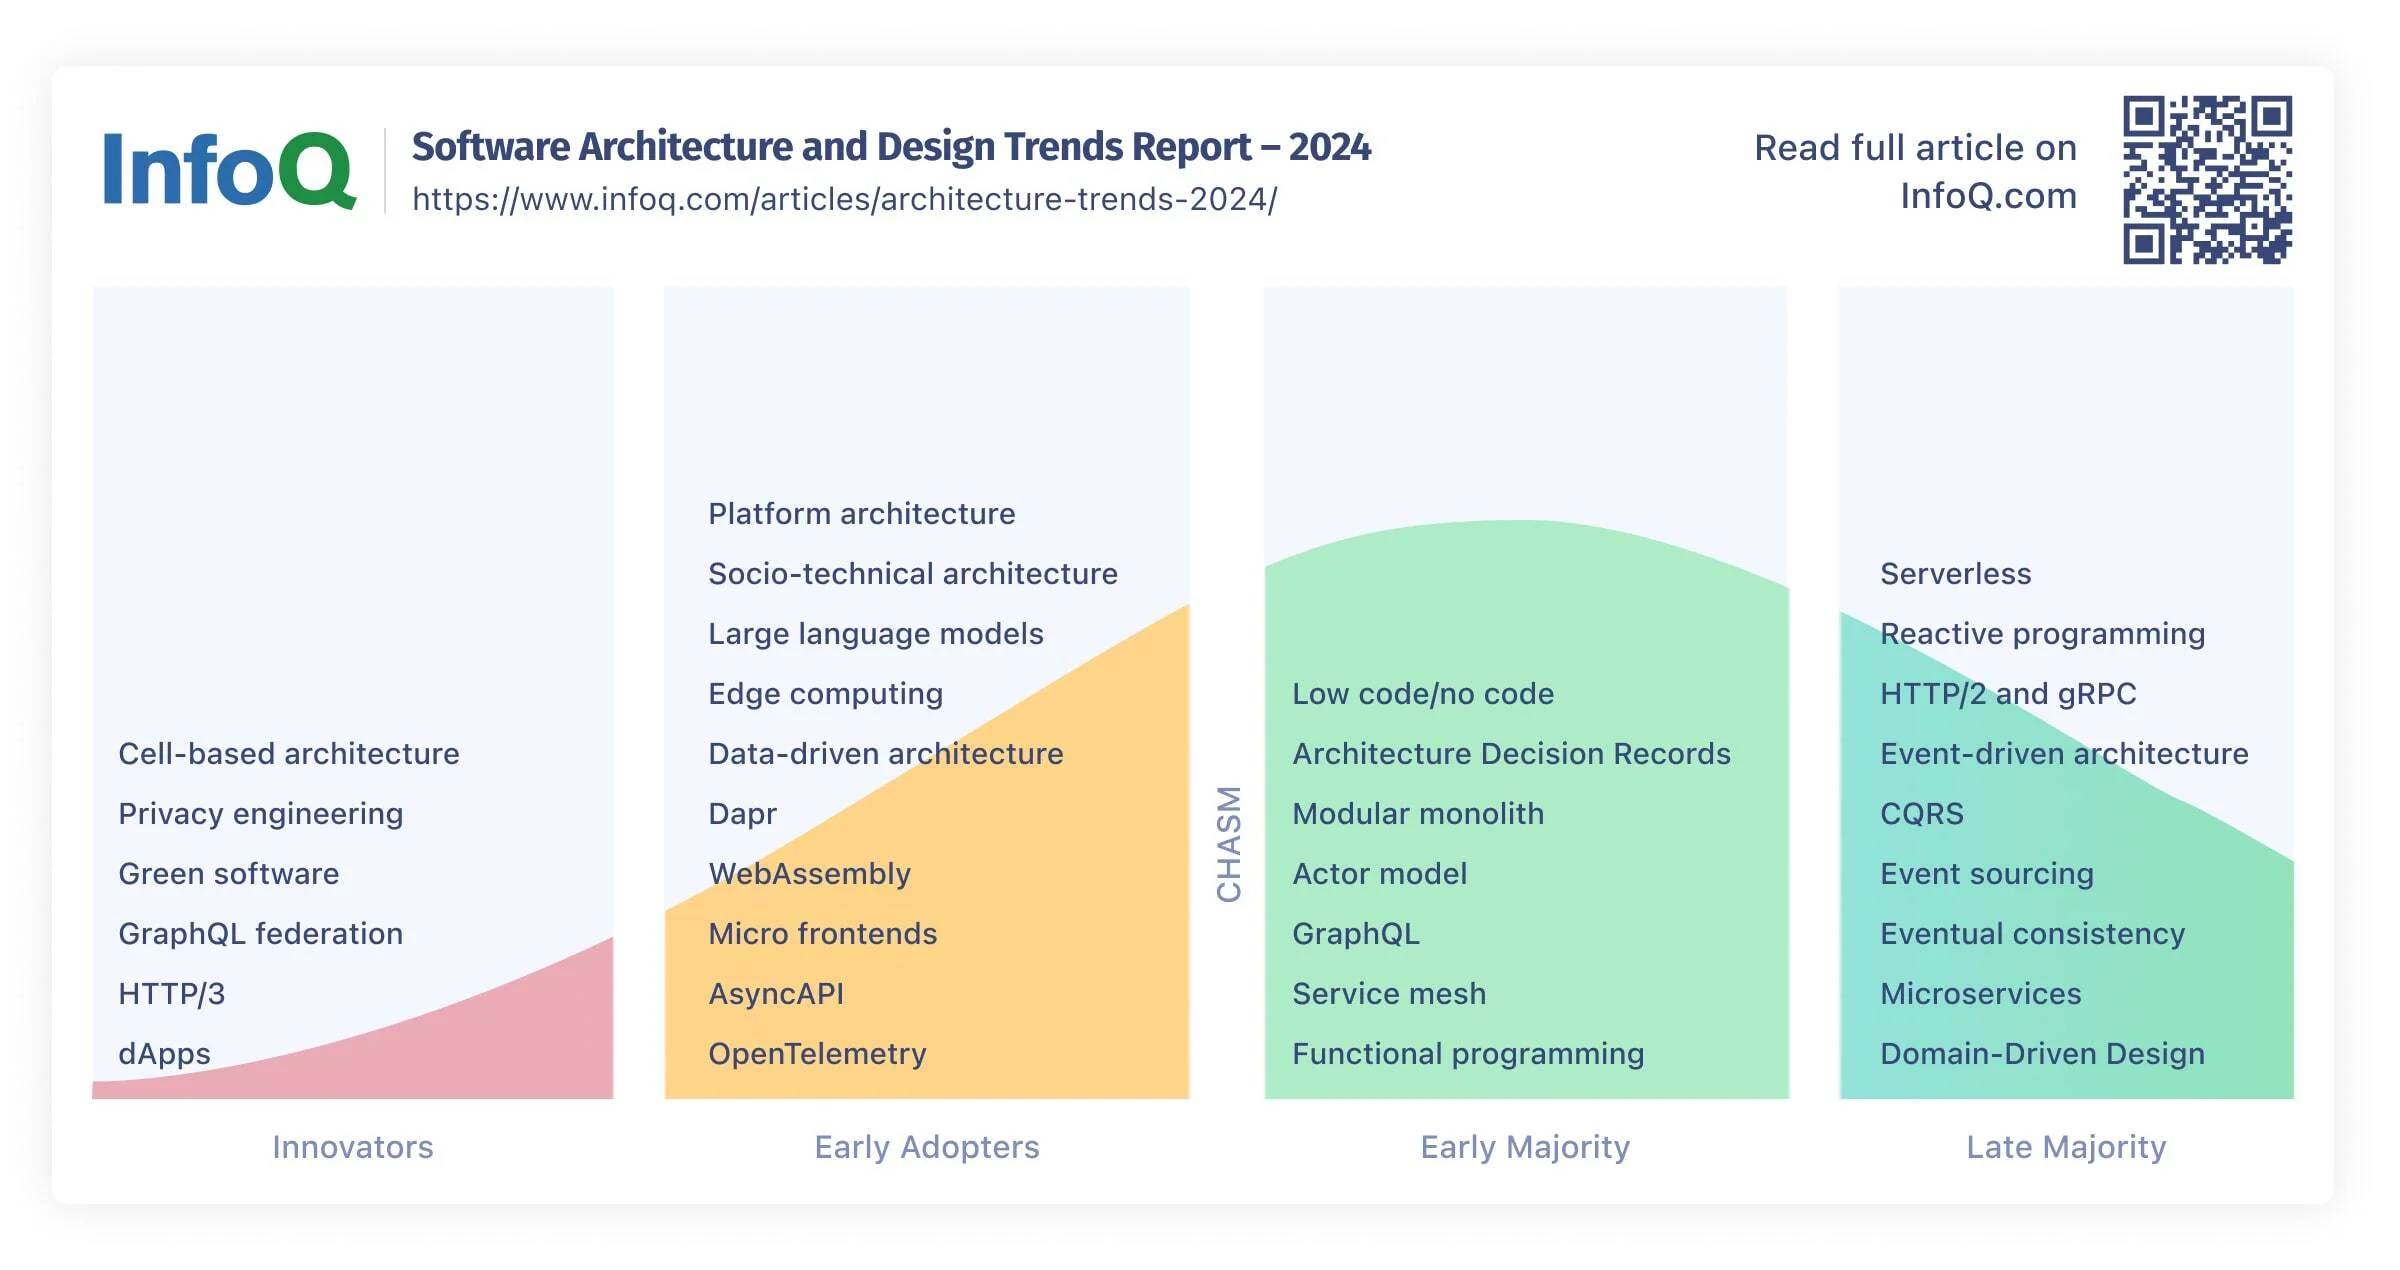 InfoQ Software Architecture and Design Trends Report 2024